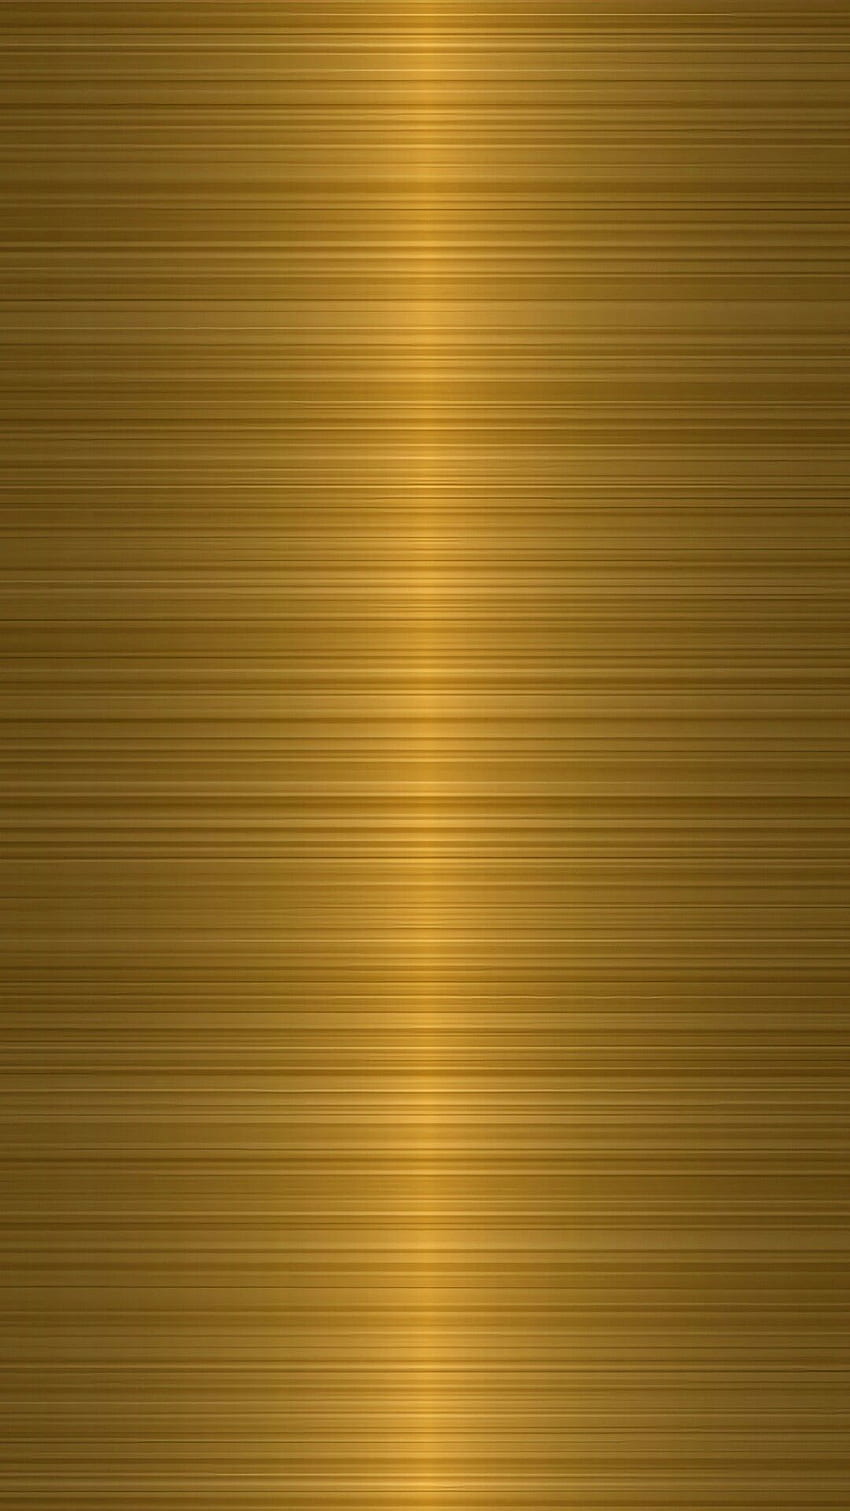 Gold Texture 6 - Gold Color For Mobile -, Golden Colour HD phone wallpaper